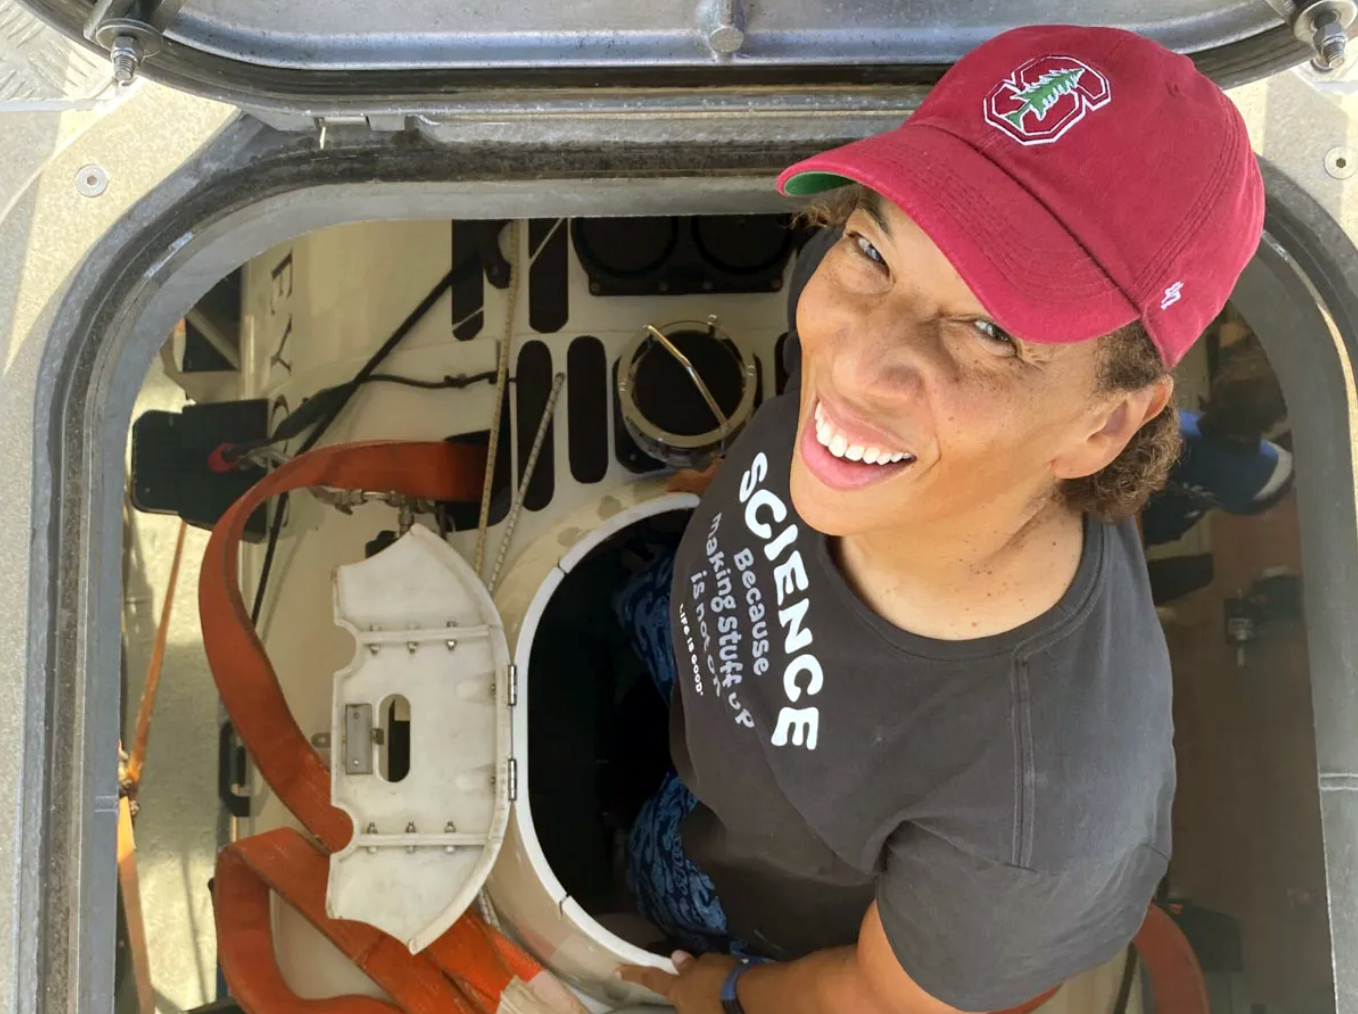 Texas A&amp;M University oceanography former student Dawn Wright smiles while climbing out of the hatch of the submersible "The Limiting Factor"